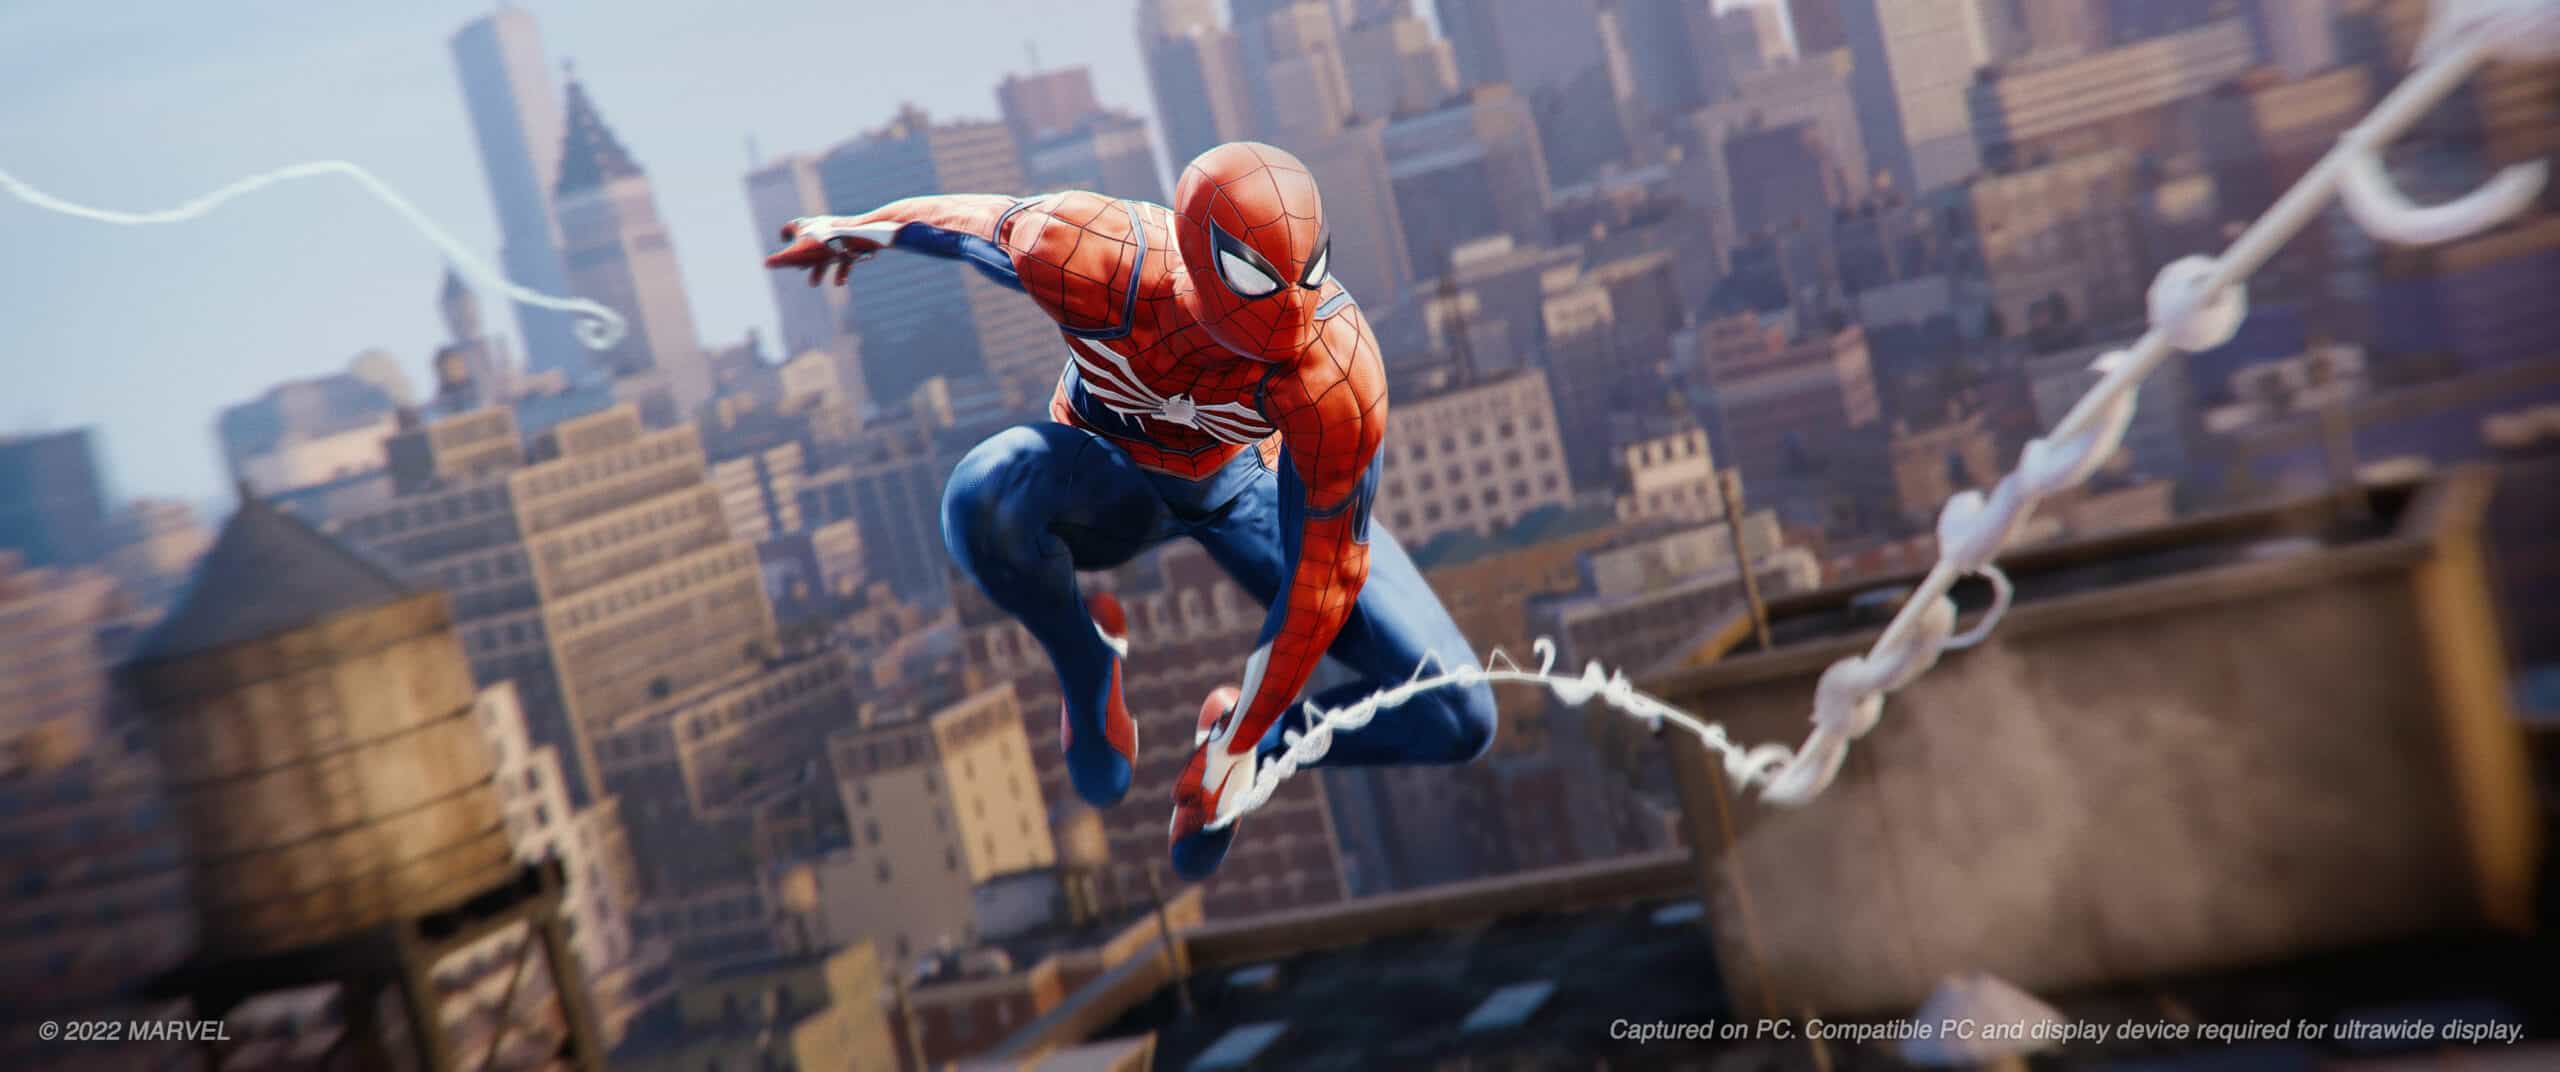 Spider-Man Remastered PC release time – when can I play the game?